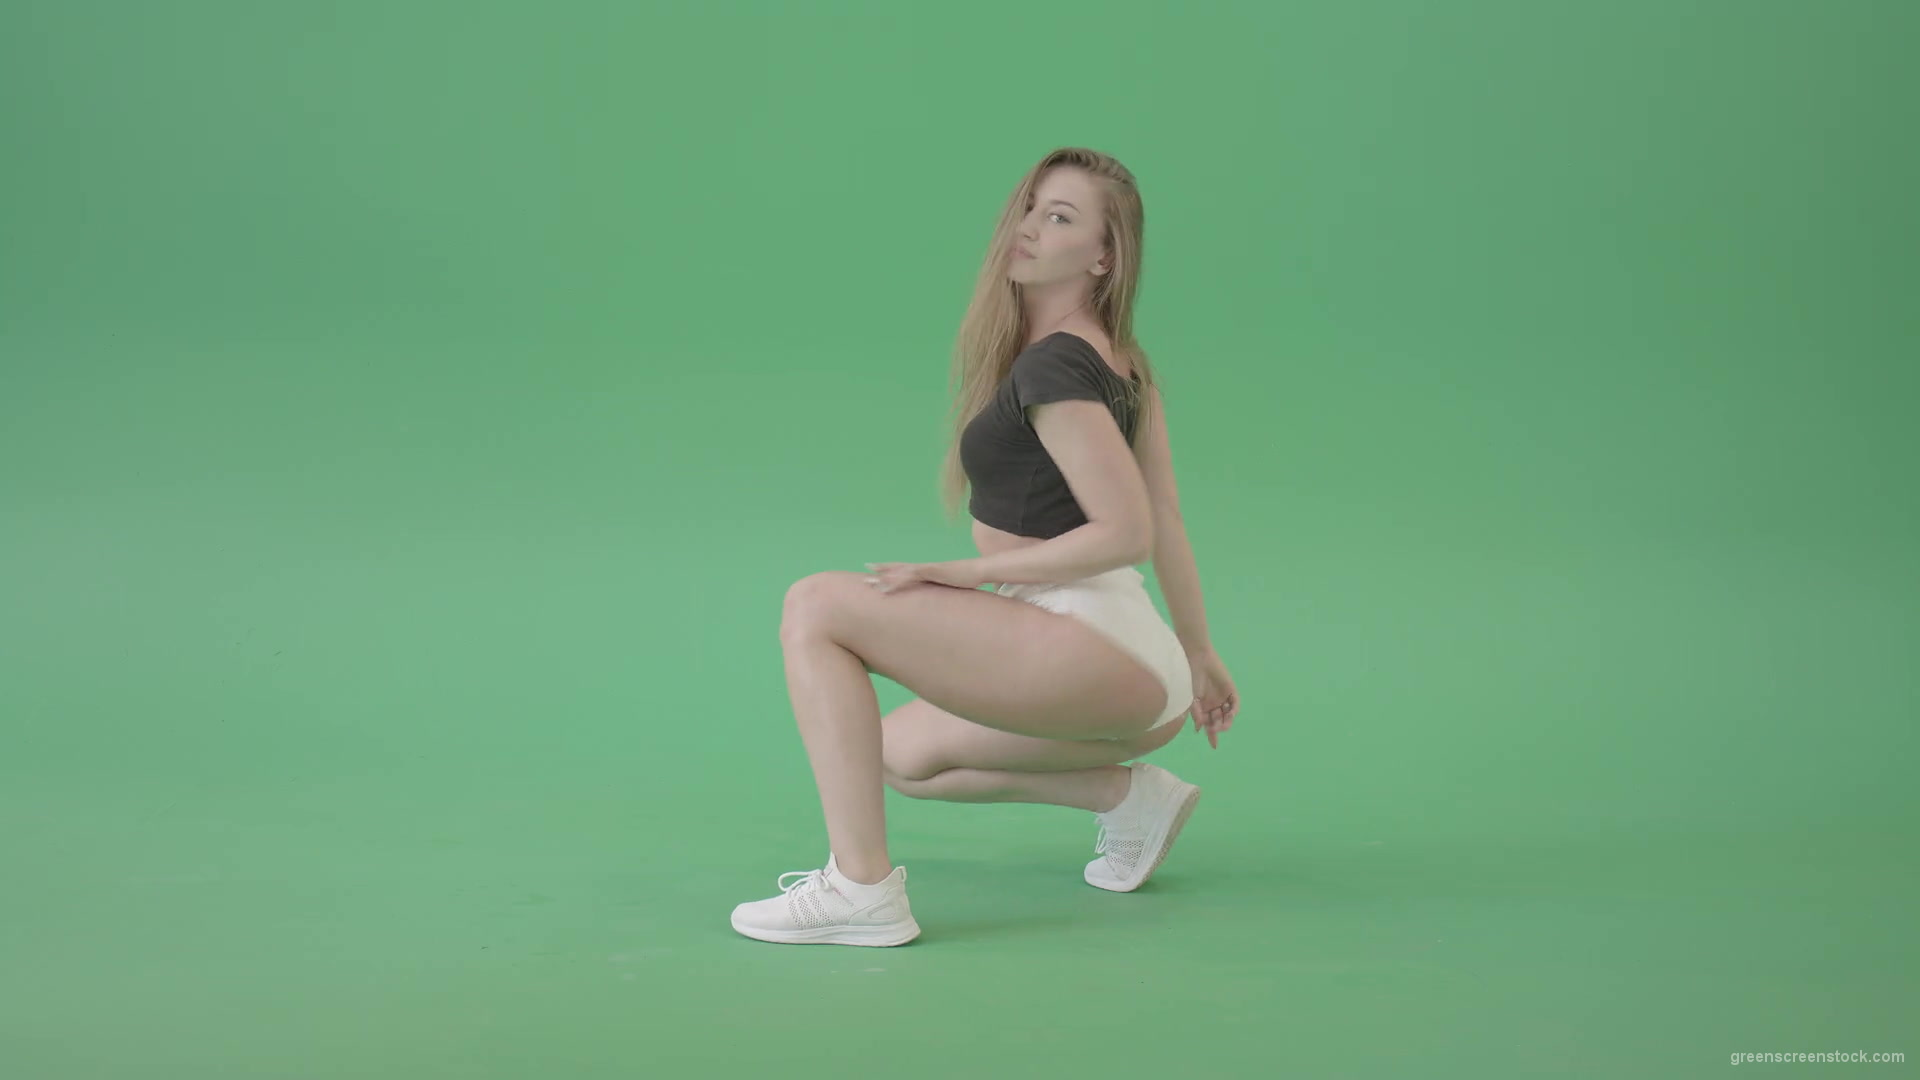 Girl-in-sitting-pose-twerking-shaking-ass-isolated-on-green-screen-4K-Video-Footage-1920_007 Green Screen Stock